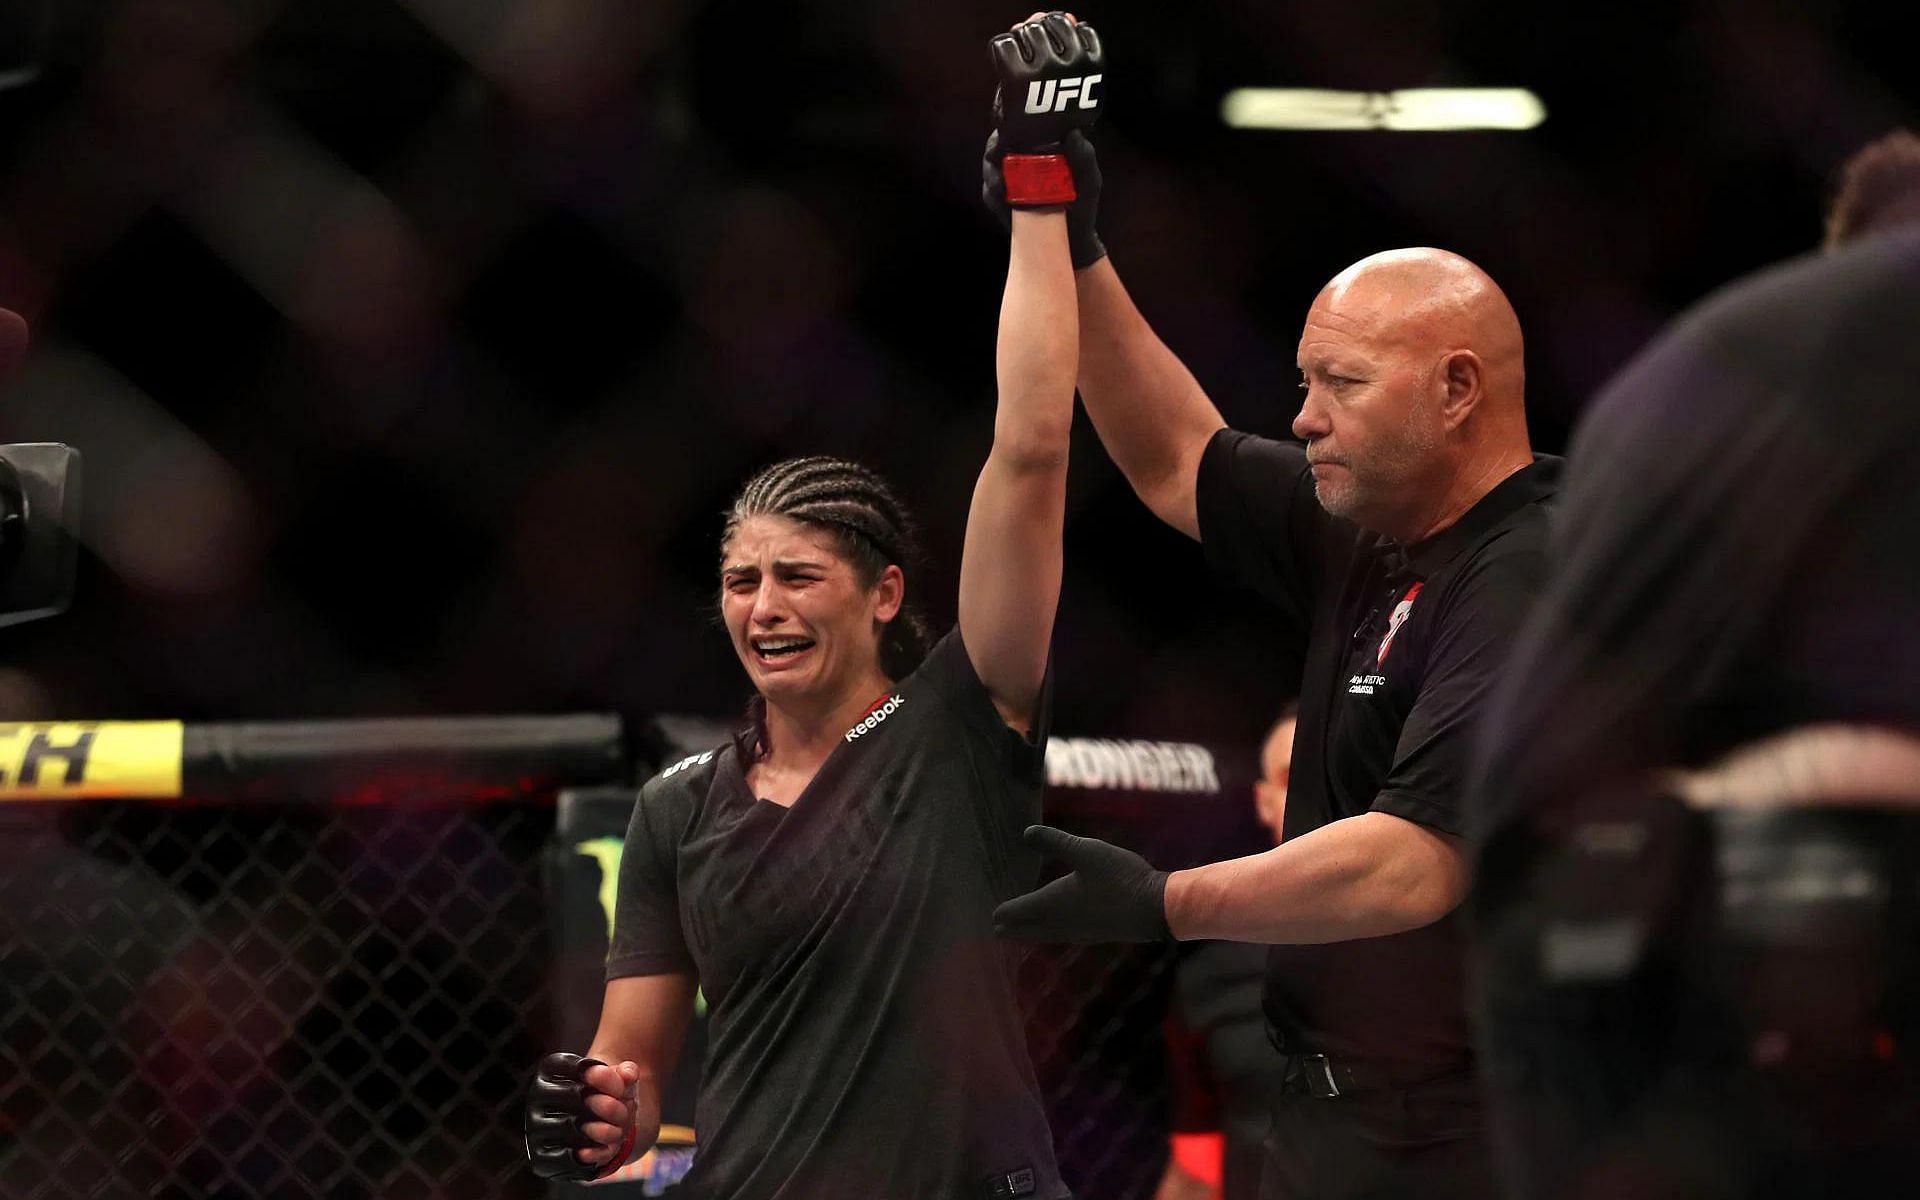 Julia Avila opens up about the struggles of a UFC fighter